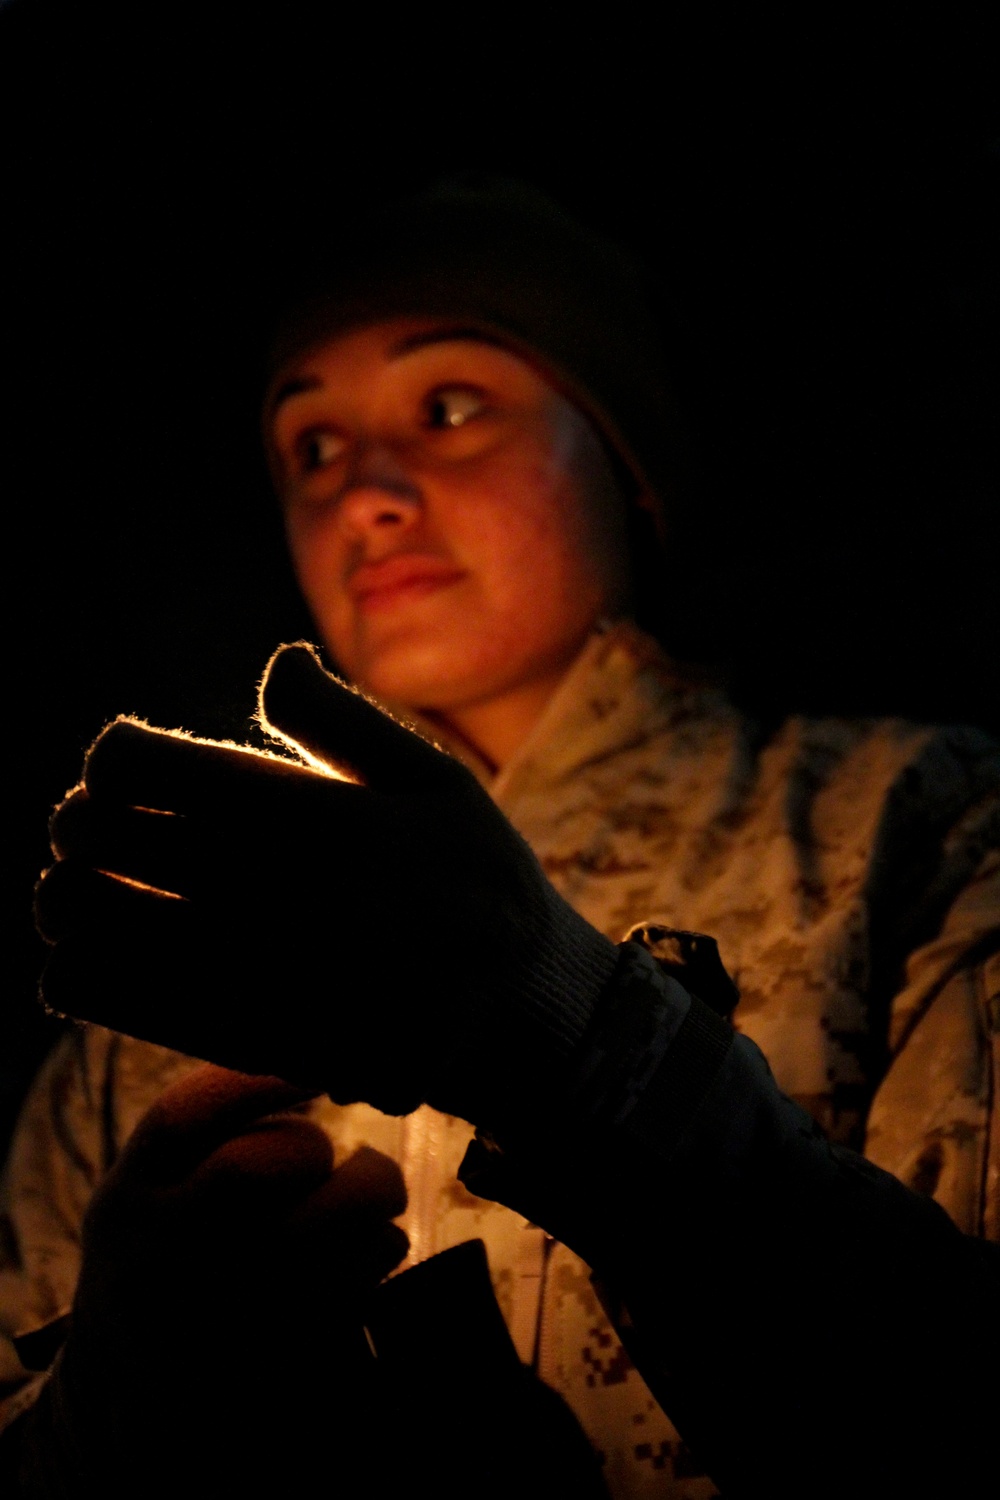 Servicemembers observe moment of silence, candlelight vigil for Sandy Hook victims, families